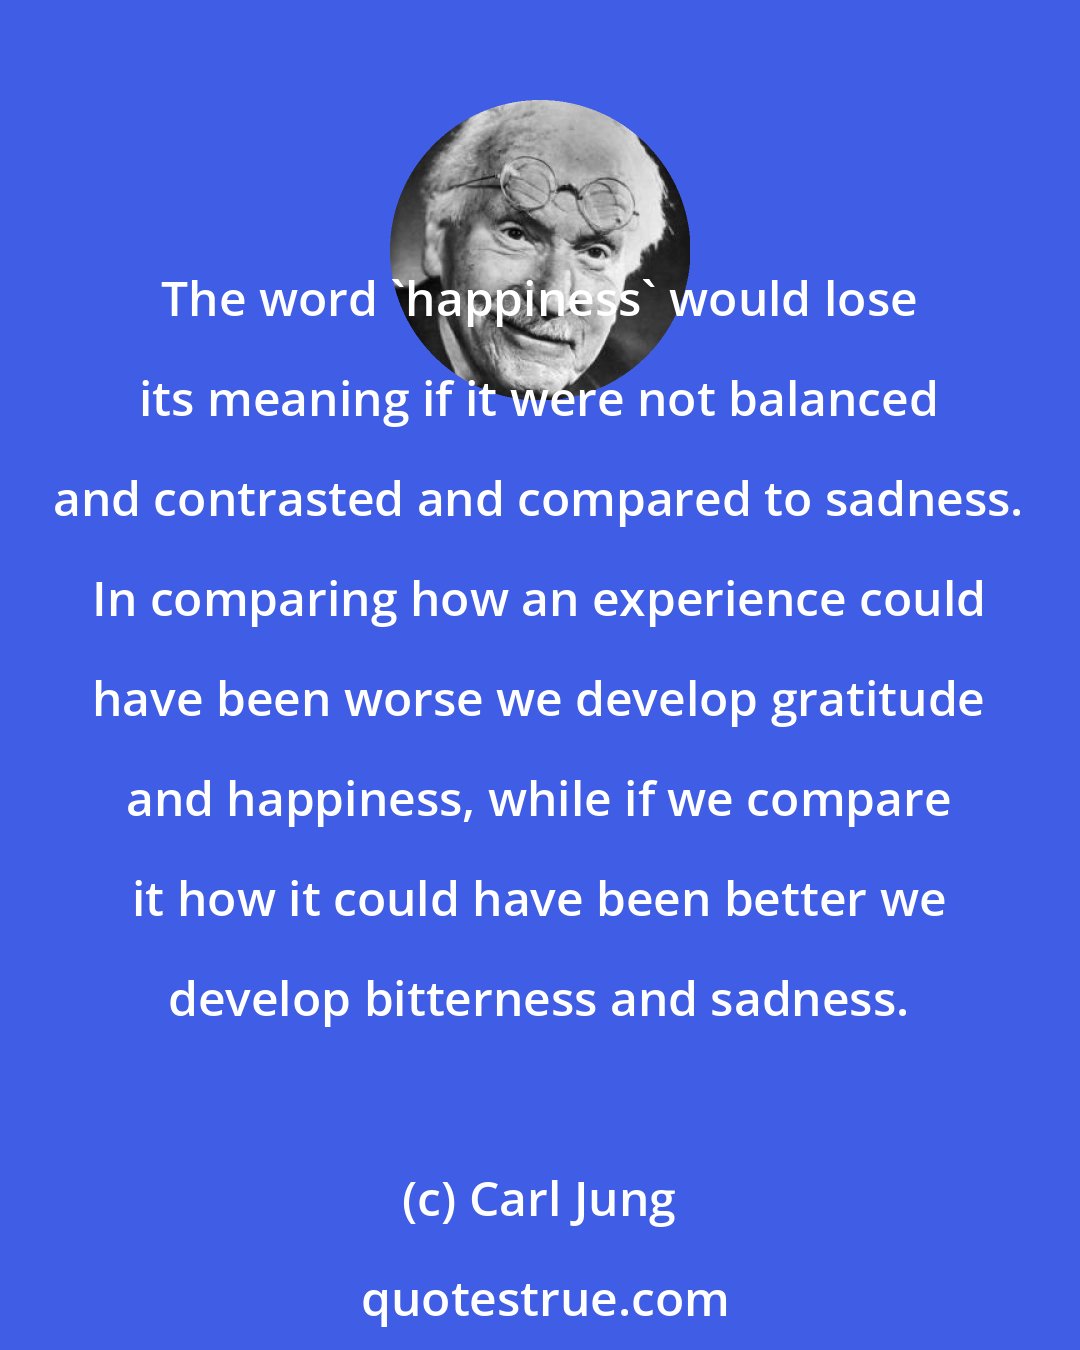 Carl Jung: The word 'happiness' would lose its meaning if it were not balanced and contrasted and compared to sadness. In comparing how an experience could have been worse we develop gratitude and happiness, while if we compare it how it could have been better we develop bitterness and sadness.